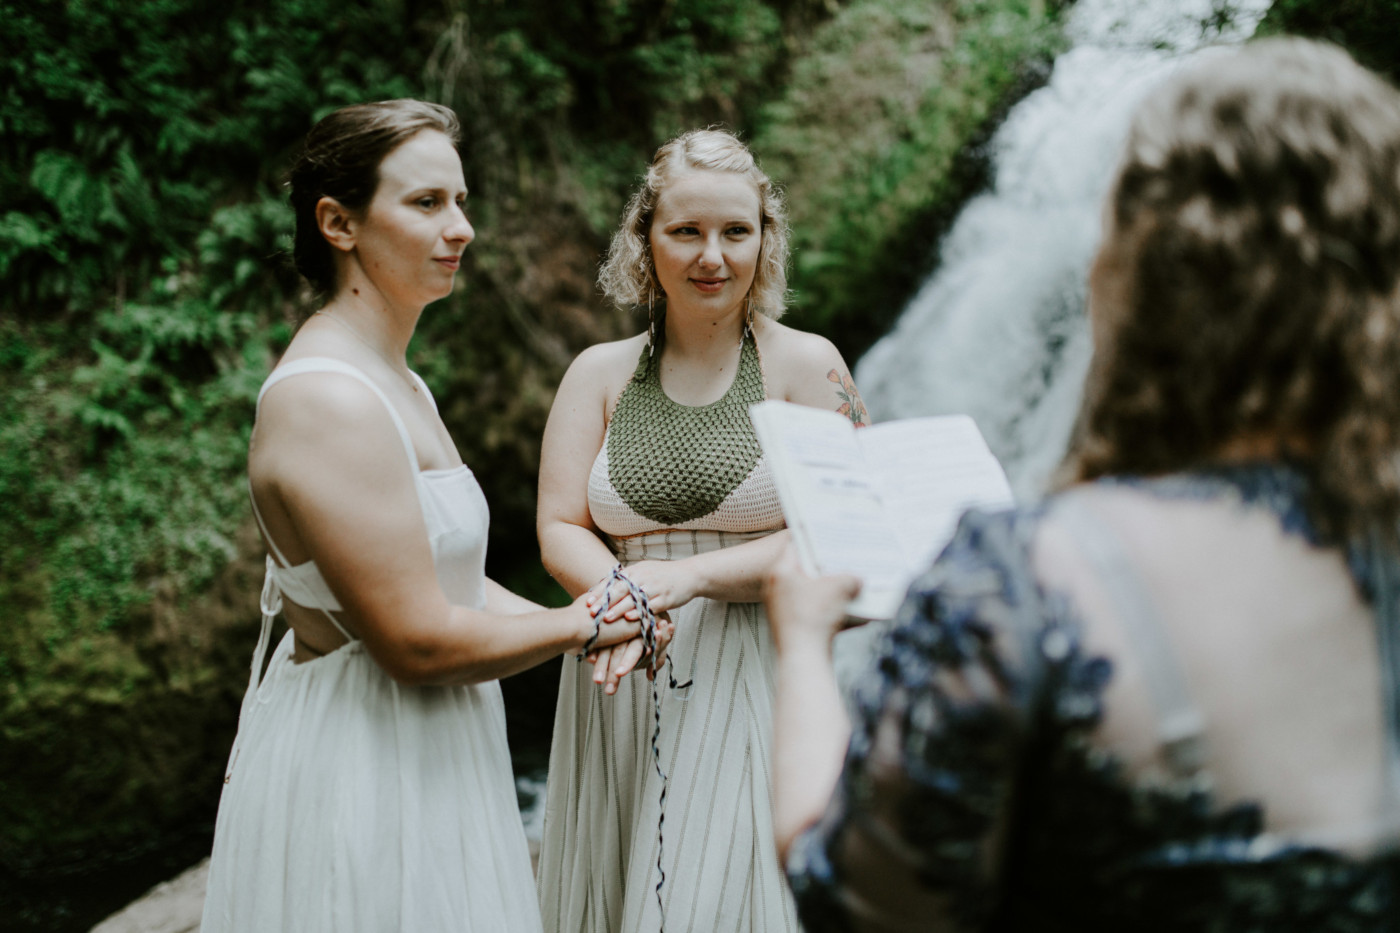 Kate and Audrey during their elopement ceremony at Bridal Veil Falls. Elopement wedding photography at Bridal Veil Falls by Sienna Plus Josh.